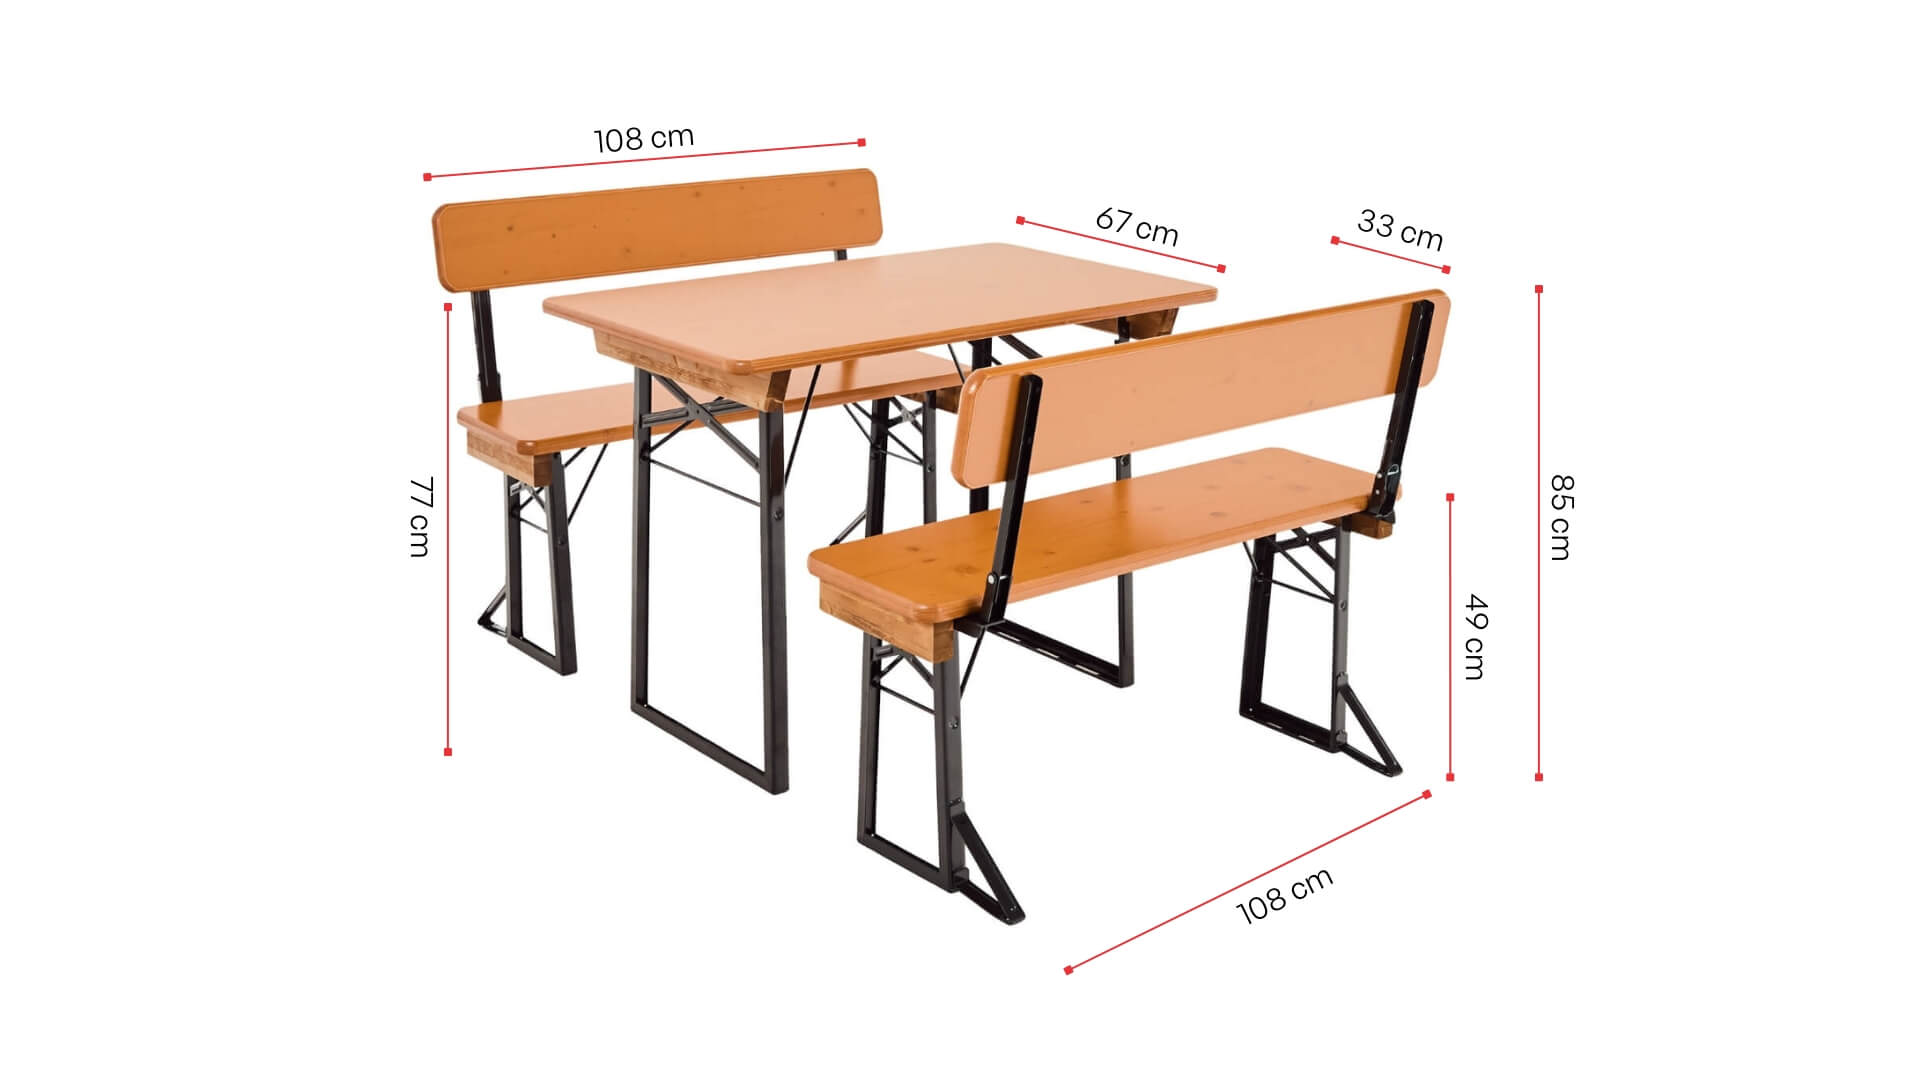 Shorty beer garden table set with backrest is shown with its dimensions in pine.